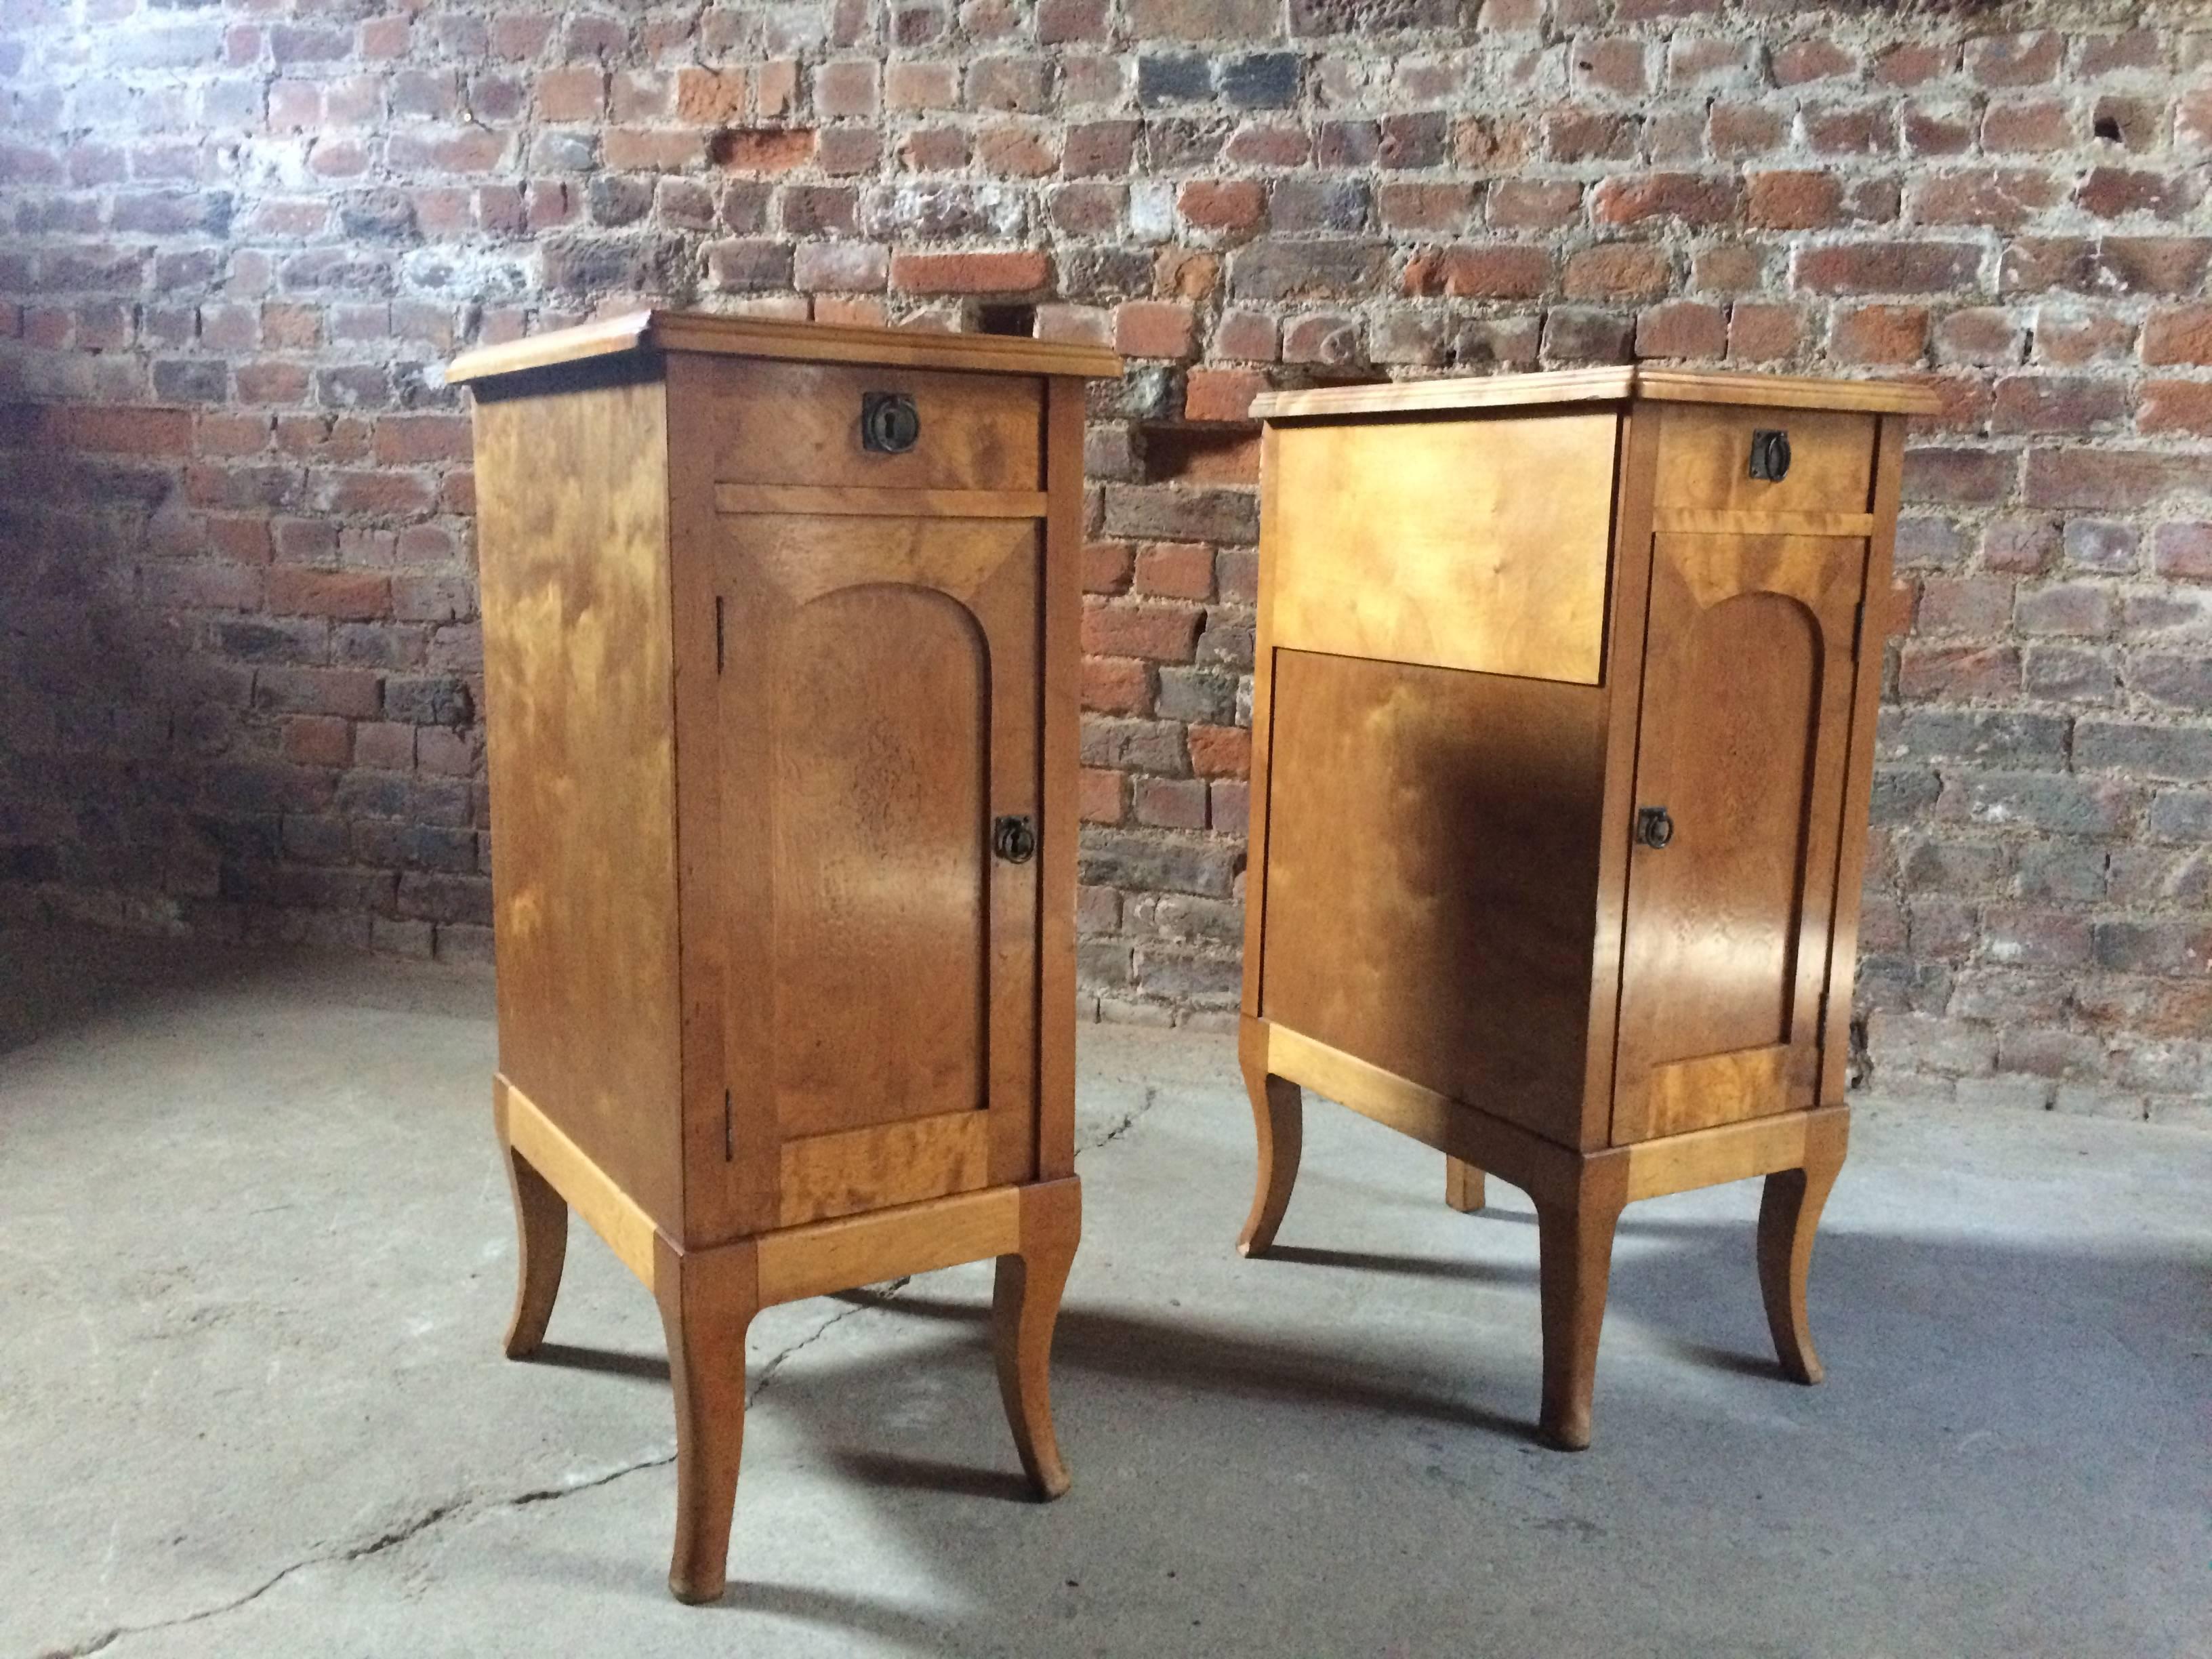 A stunning pair of early 20th century French satinwood bedside table cabinets in the Art Nouveau style. The rectangular top over a short freize draw above a single cupboard door with individual drawers within. Each cupboard door with intricate